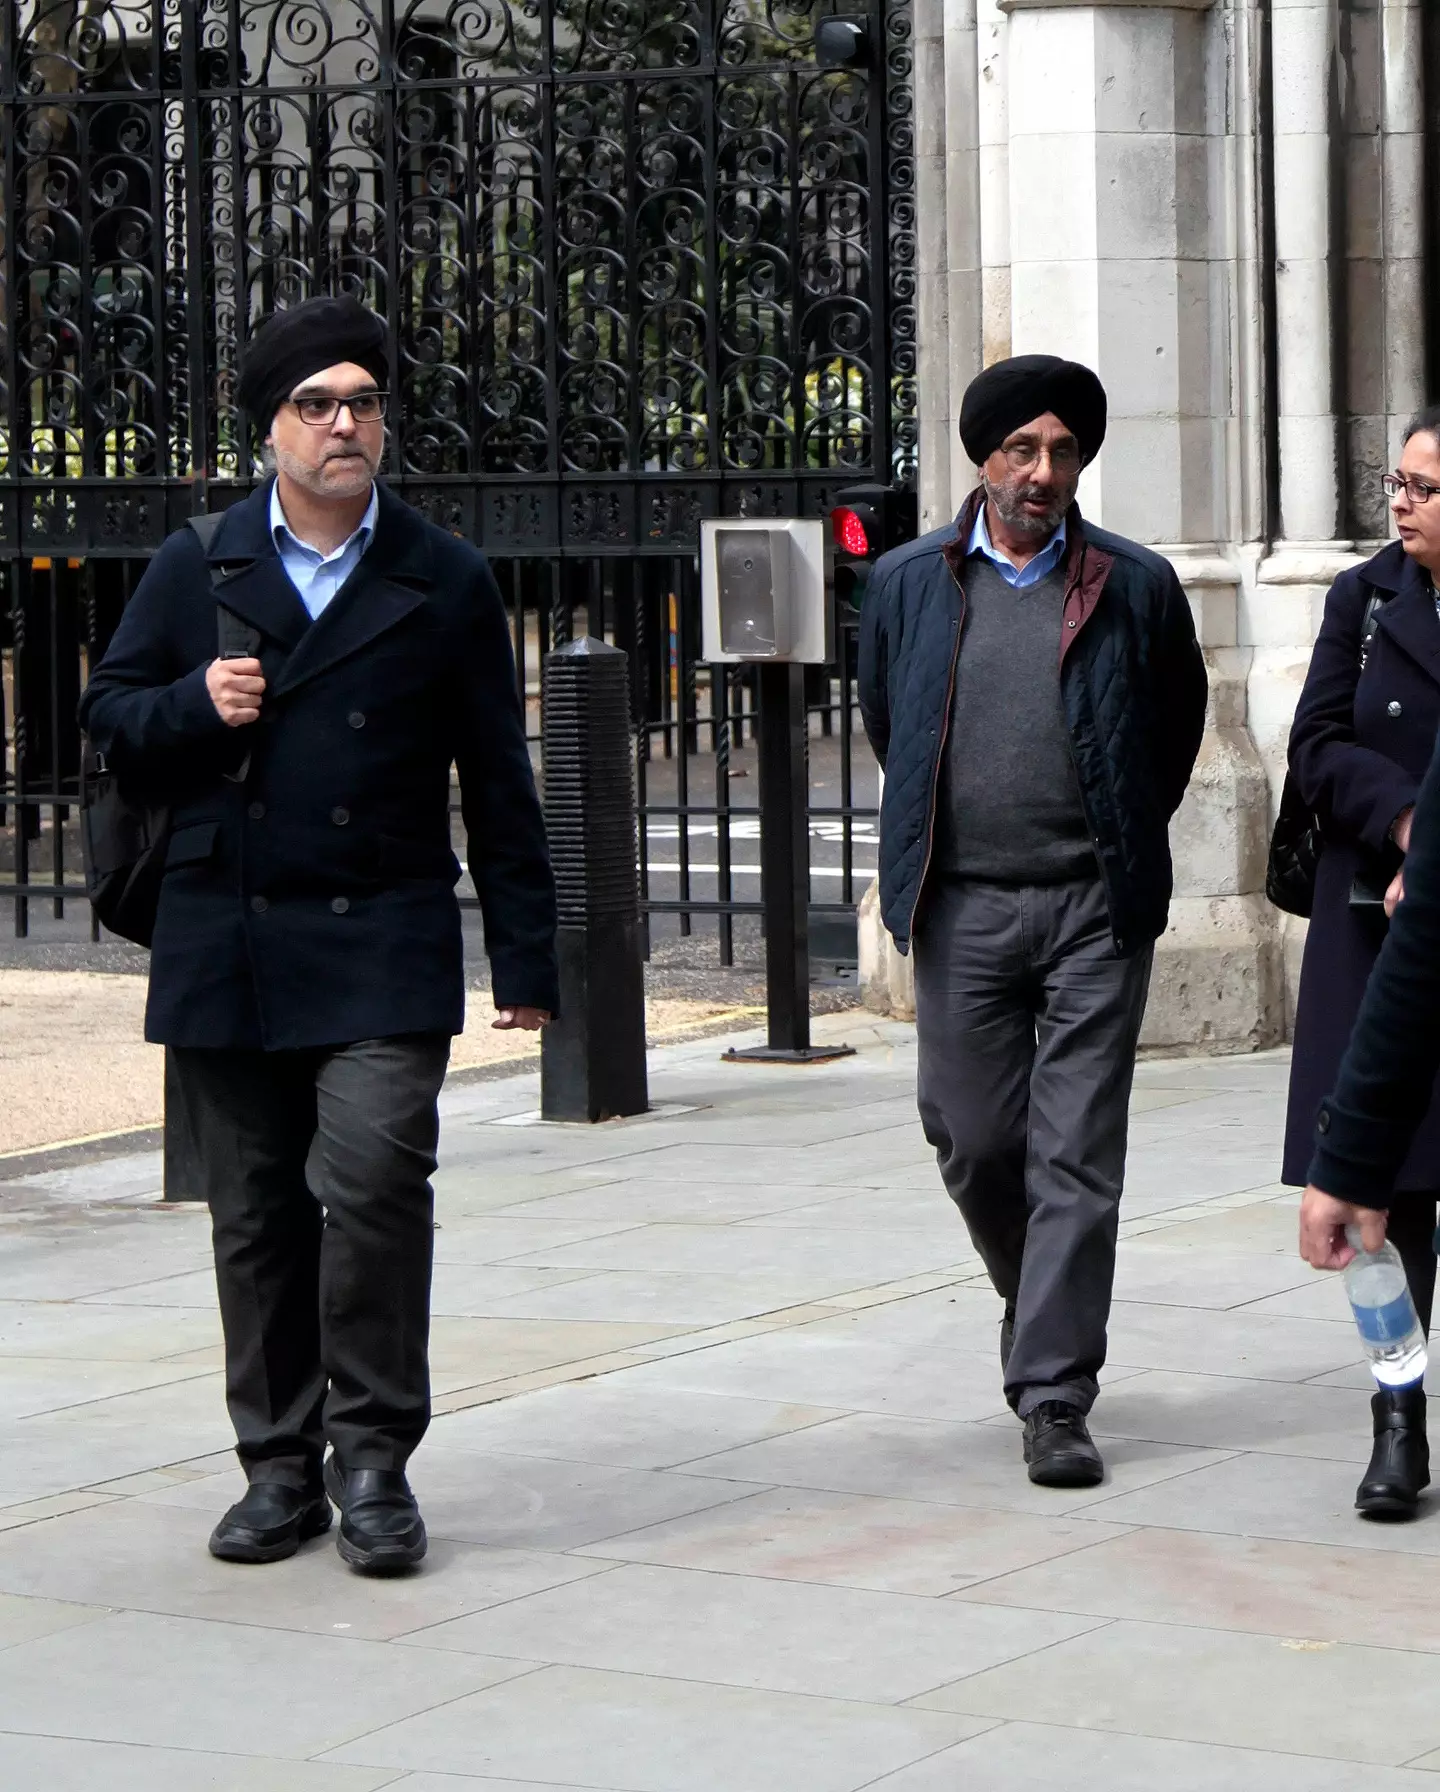 The Dhinjan family were told by their neighbours to 'go to court' if they were so unhappy, so they did.